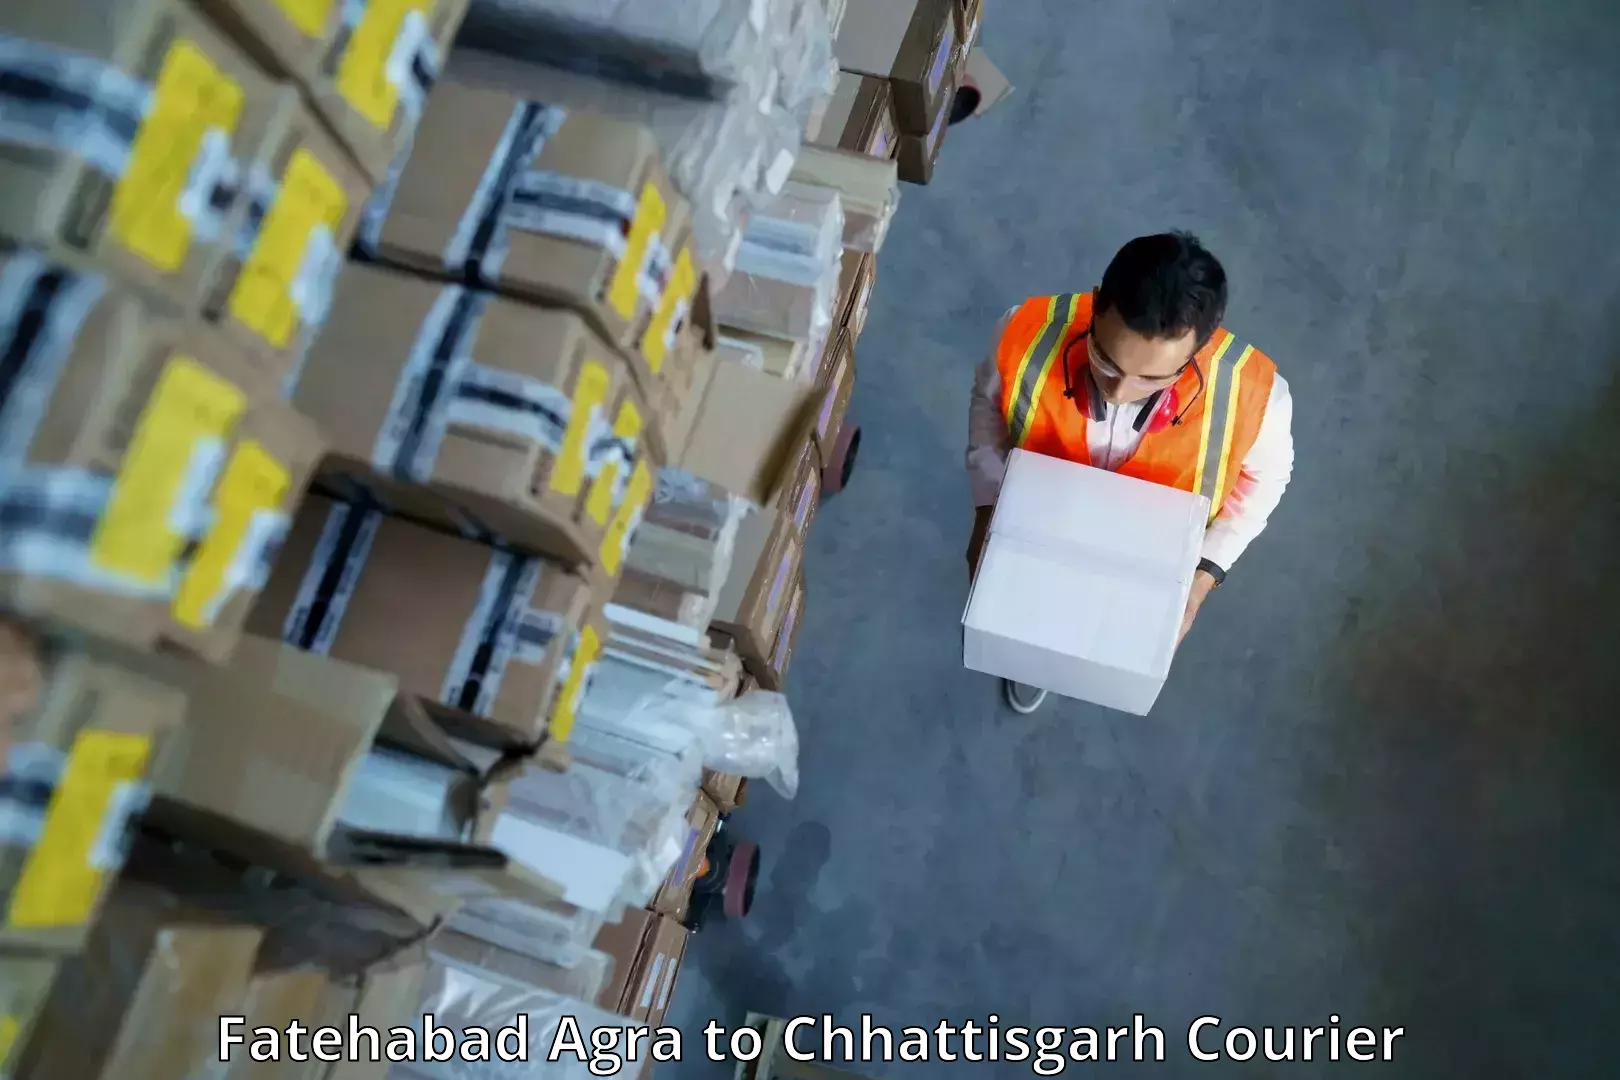 Subscription-based courier Fatehabad Agra to Chhattisgarh